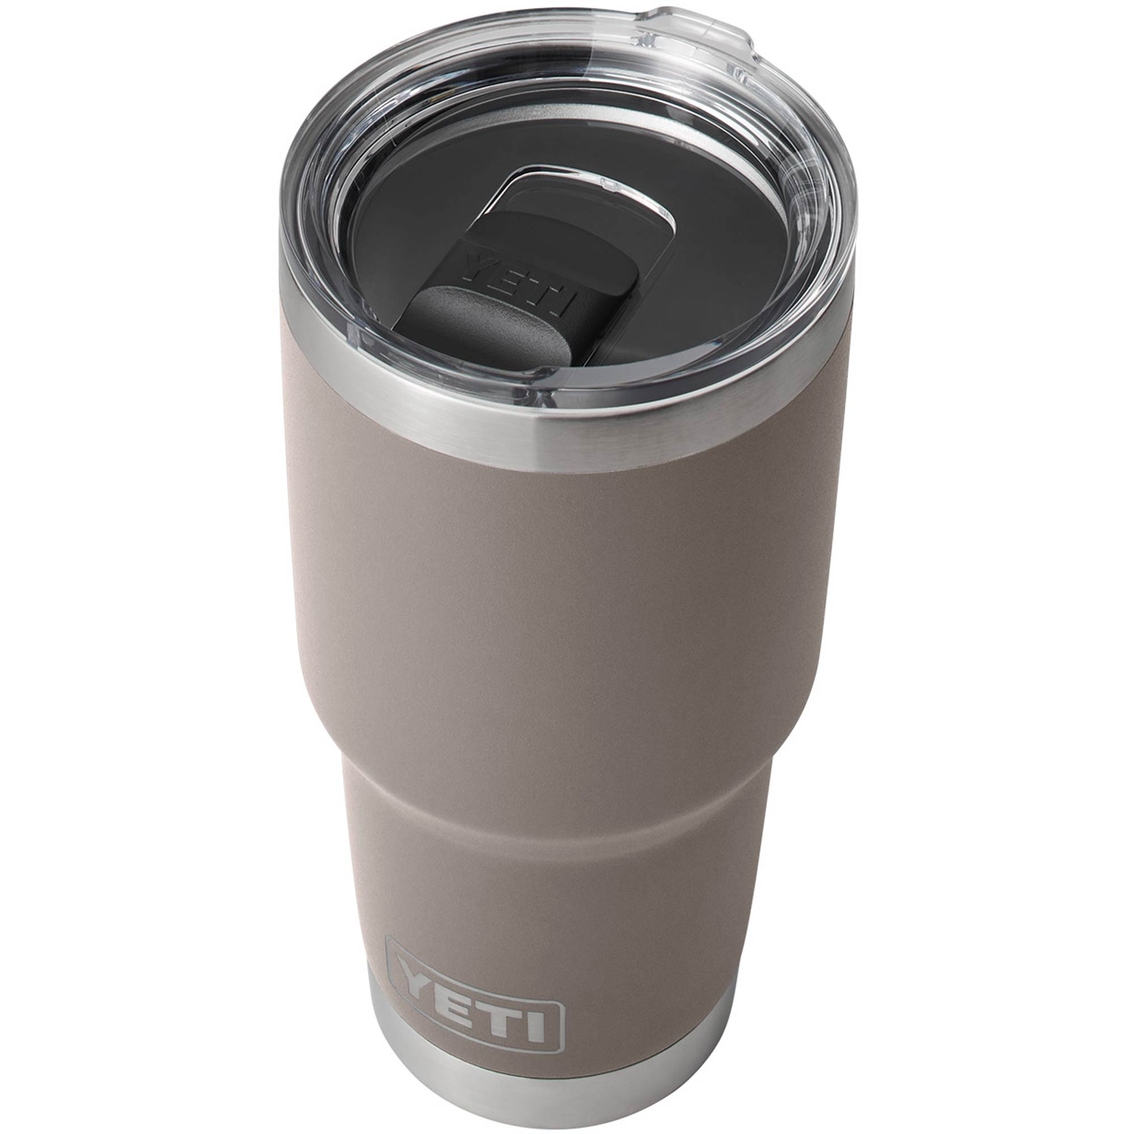 YETI Rambler 30-fl oz Stainless Steel Tumbler with MagSlider Lid, Prickly  Pear Pink at